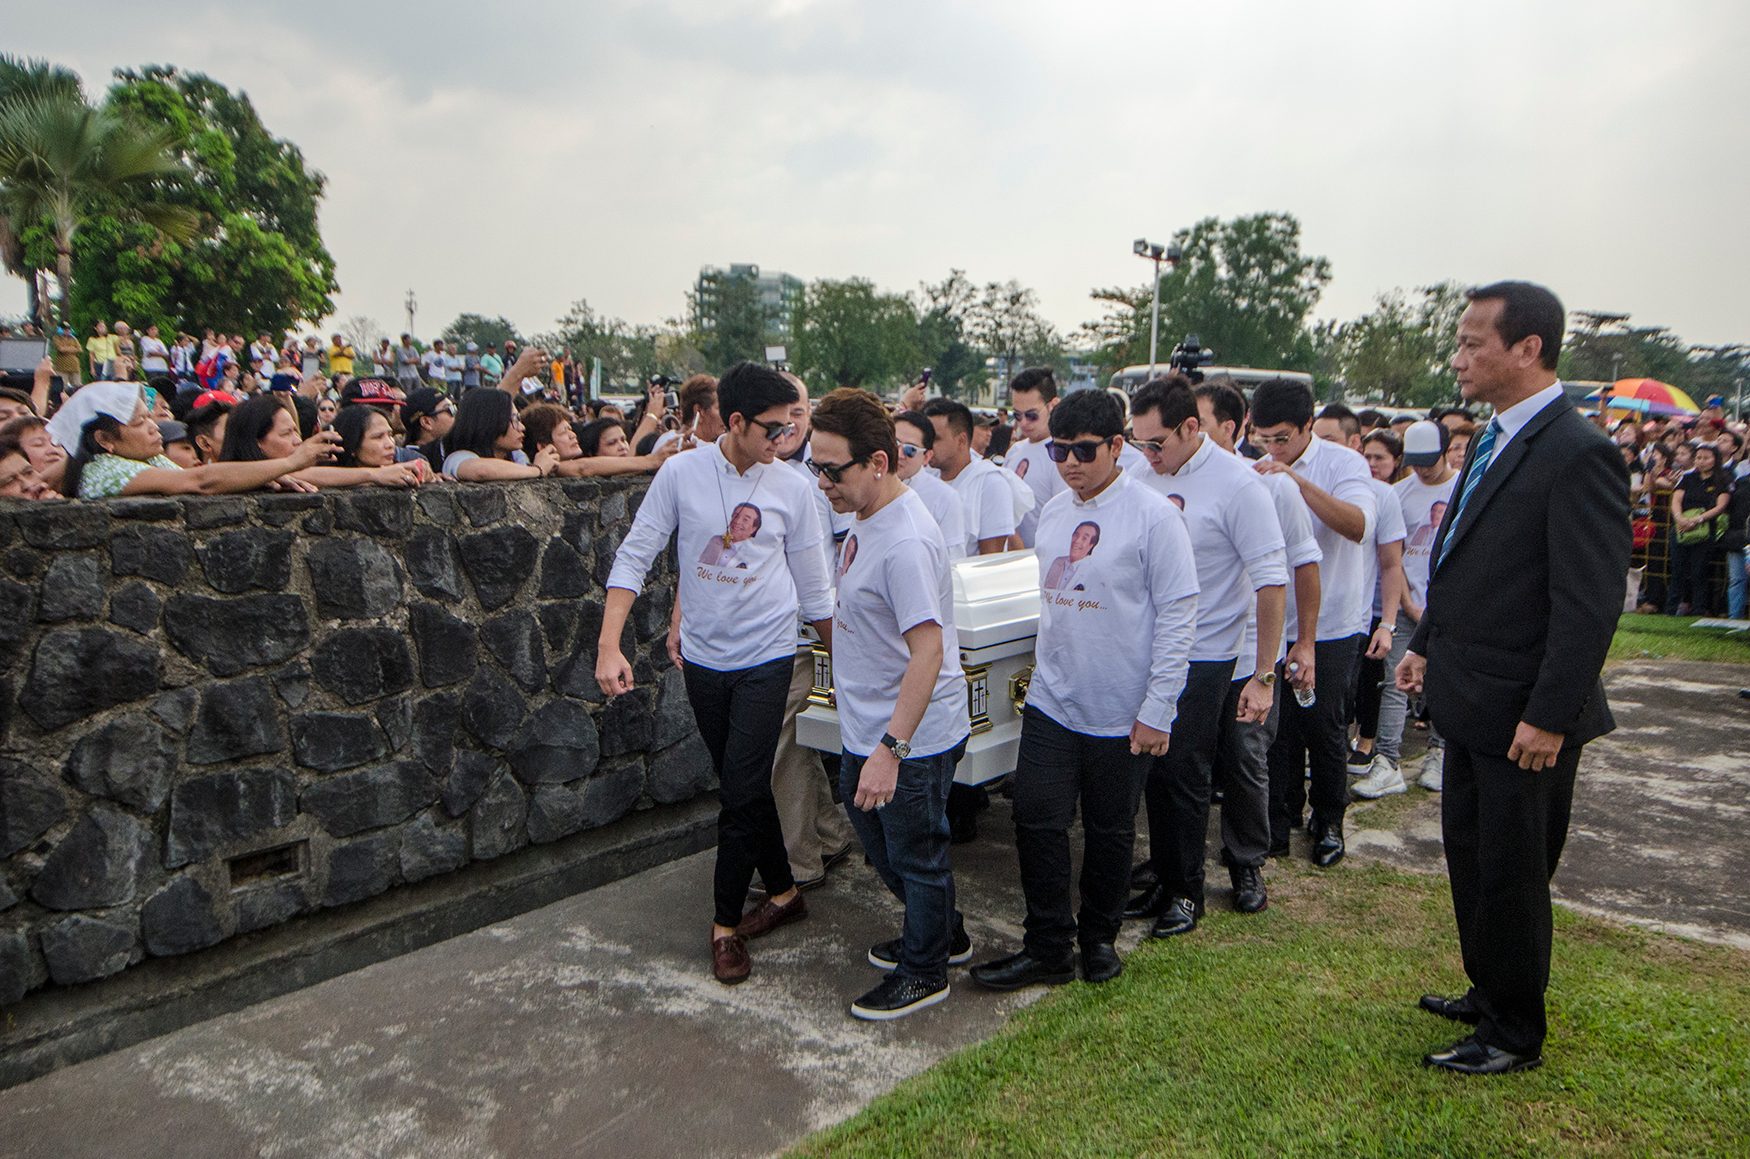 ARRIVAL. Kuya Germs' family carries his casket into Loyola Memorial. Photo by Rob Reyes/Rappler  